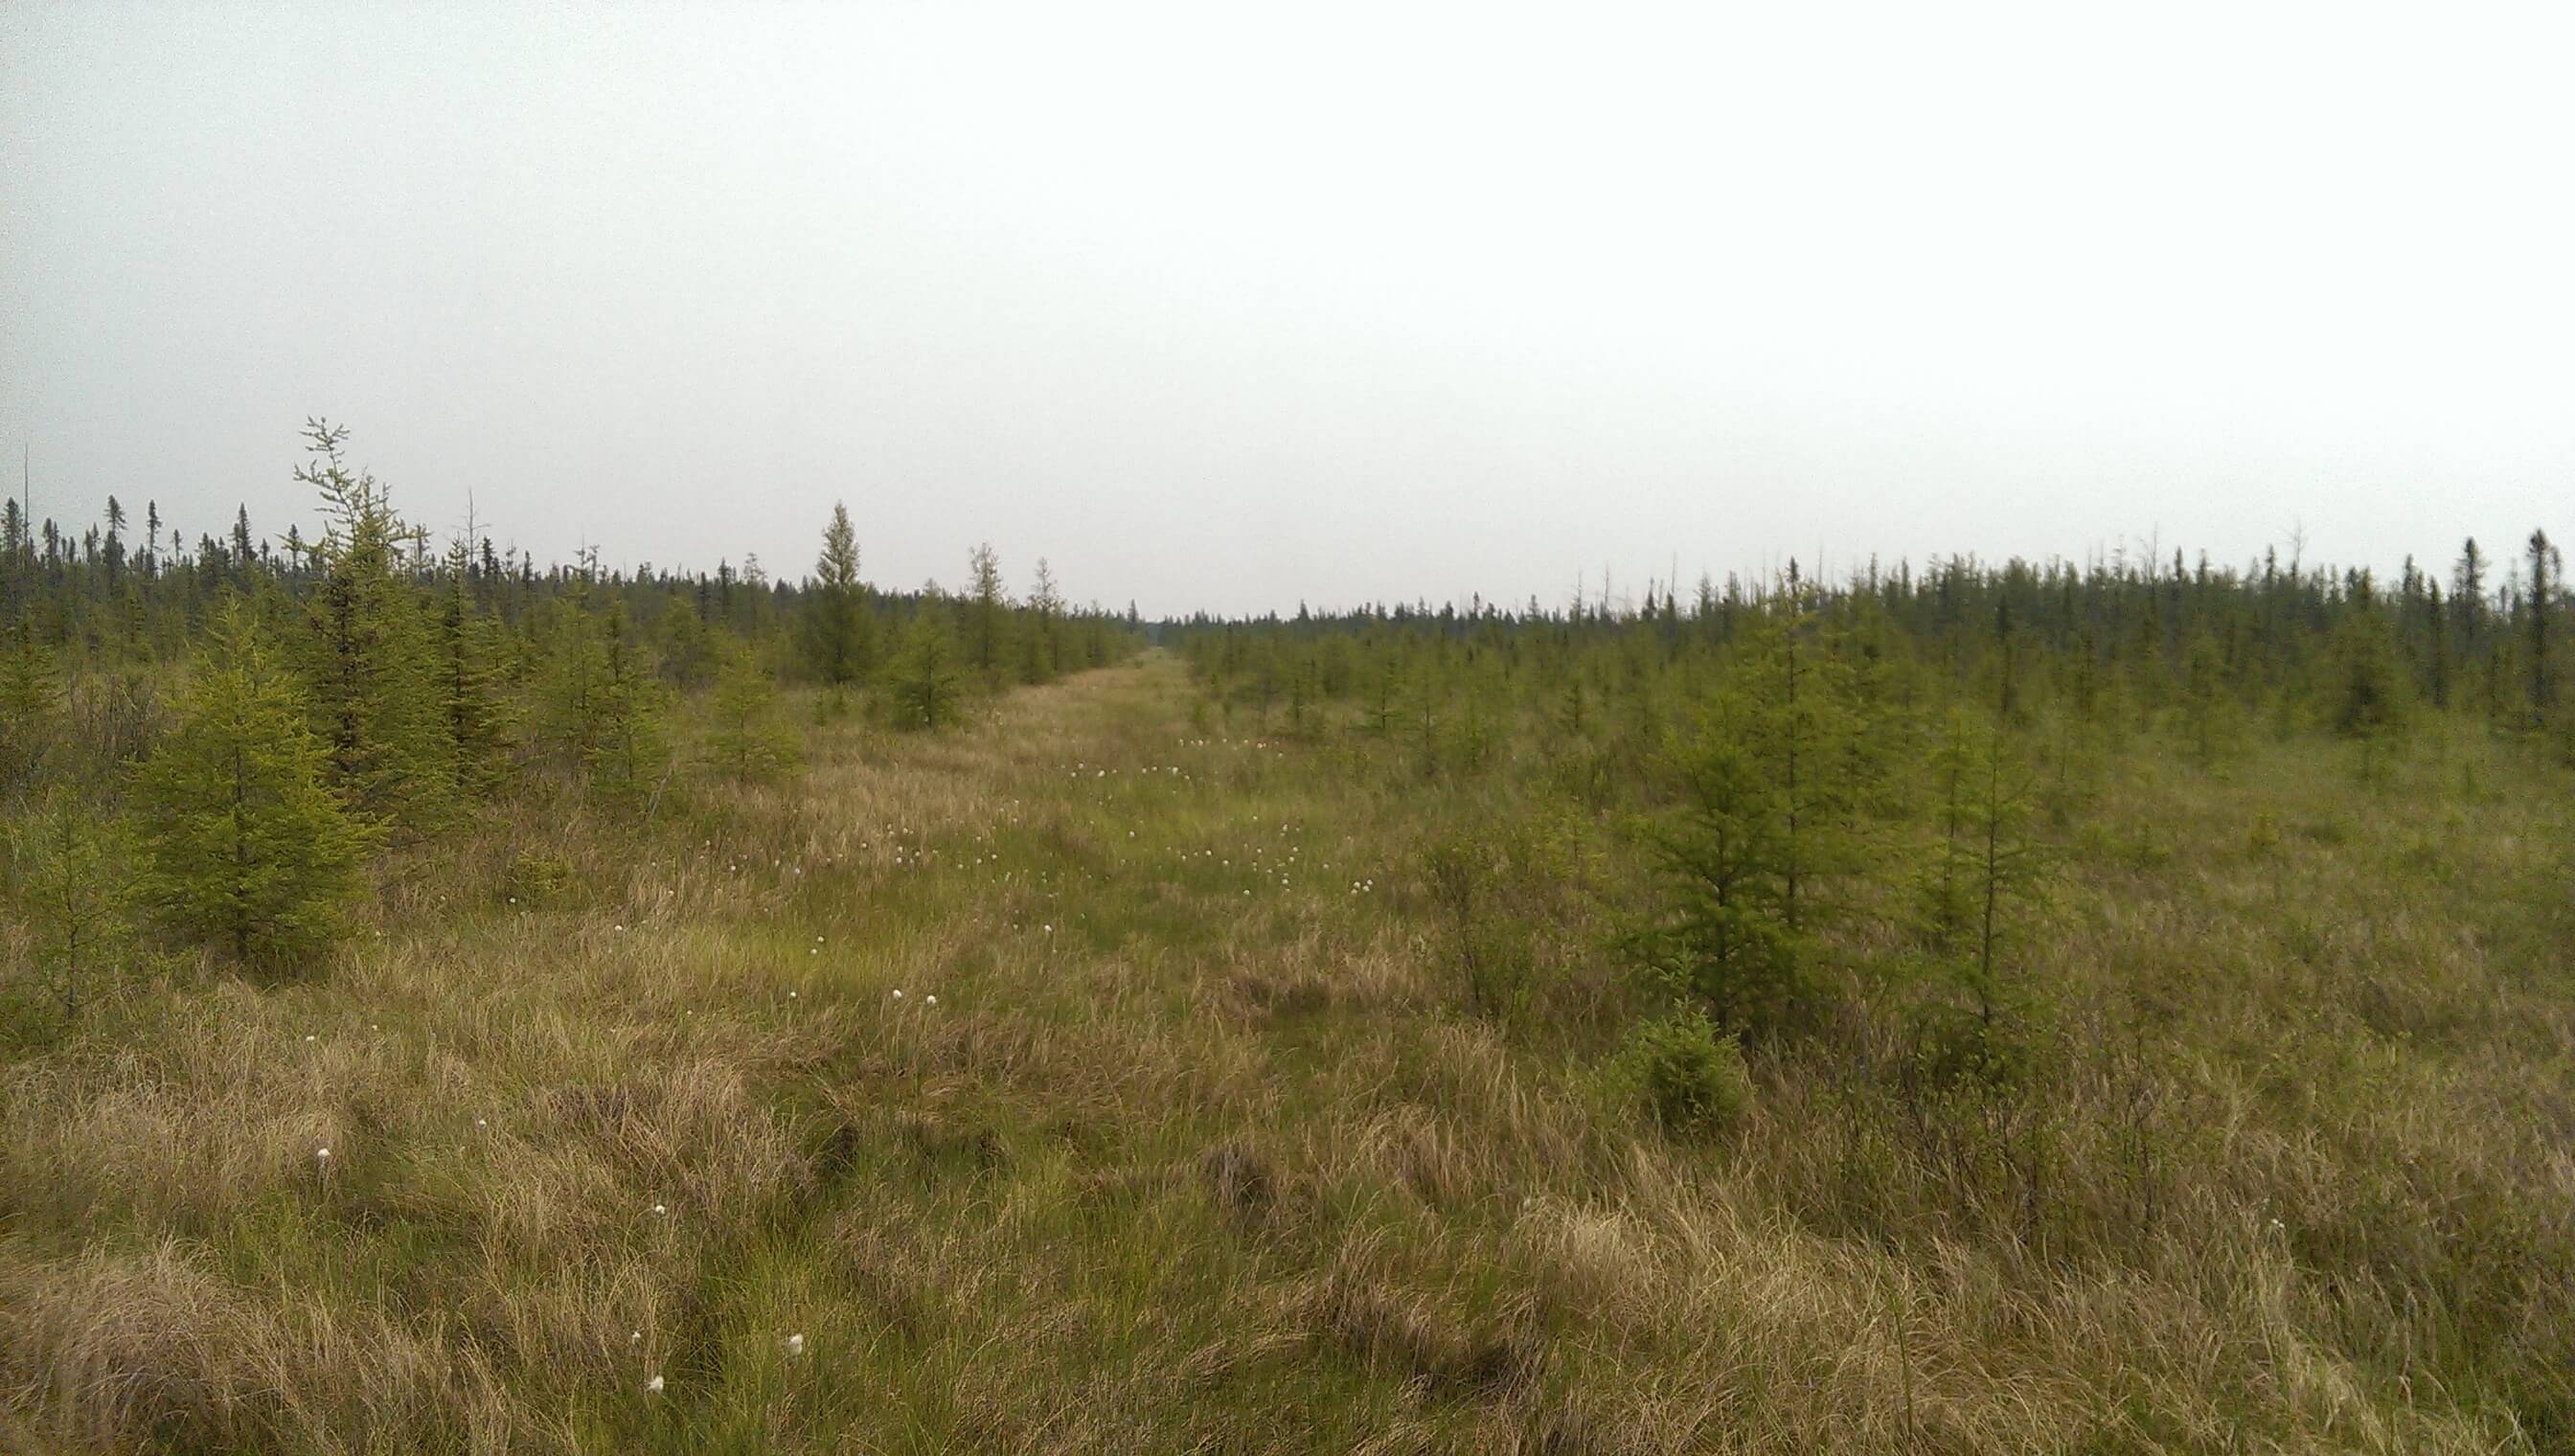 Looking east at the bog